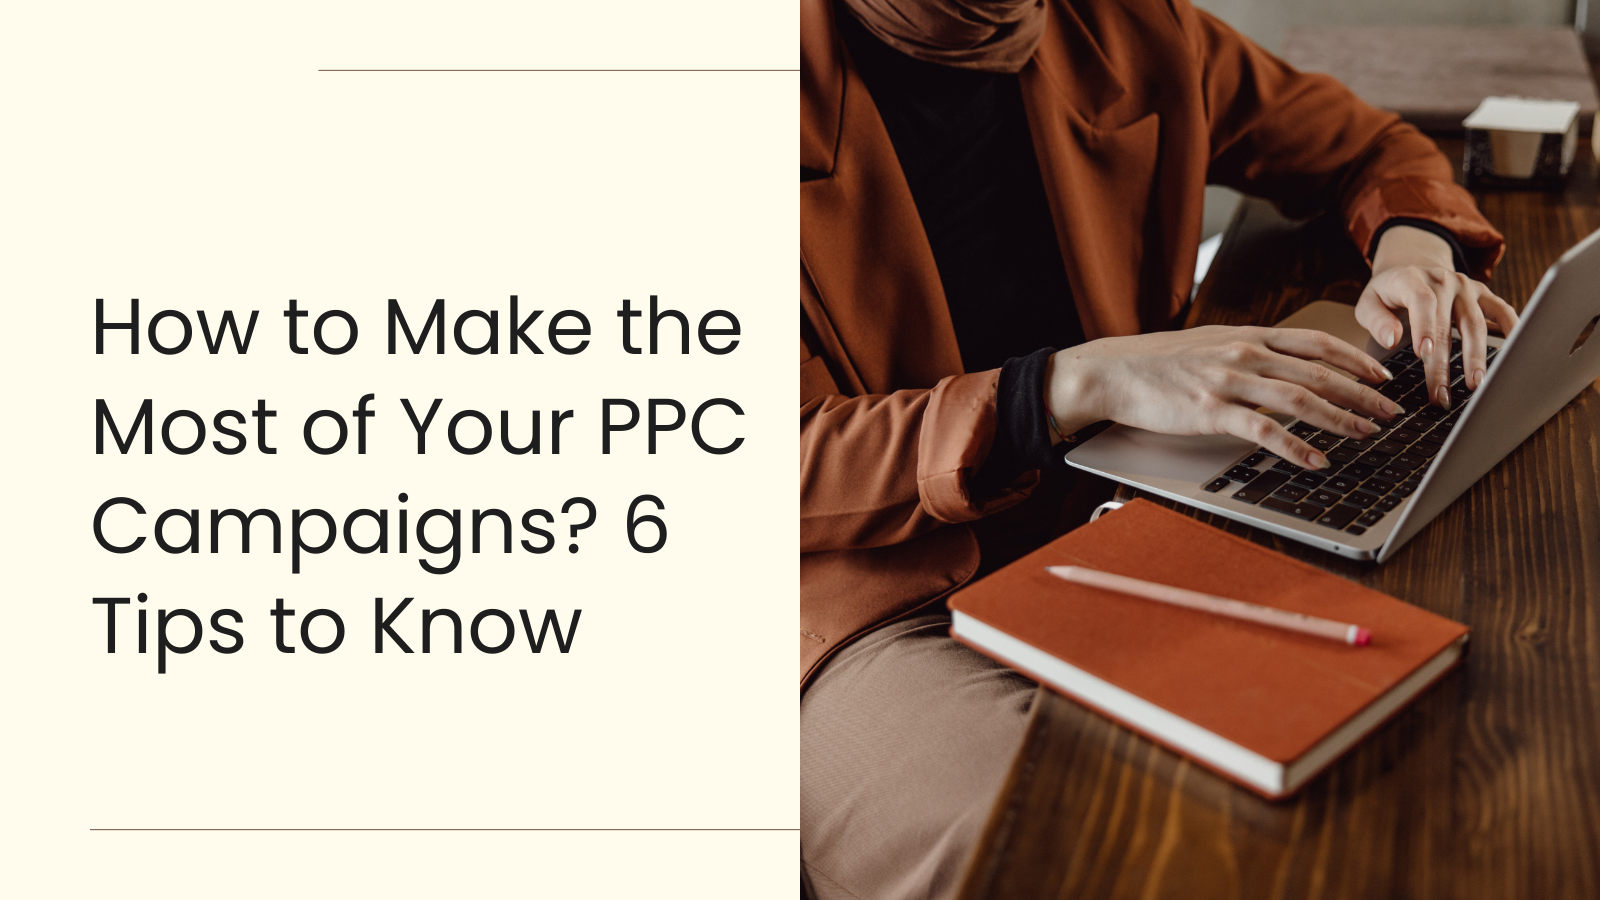 How to Make the Most of Your PPC Campaigns 6 Tips to Know